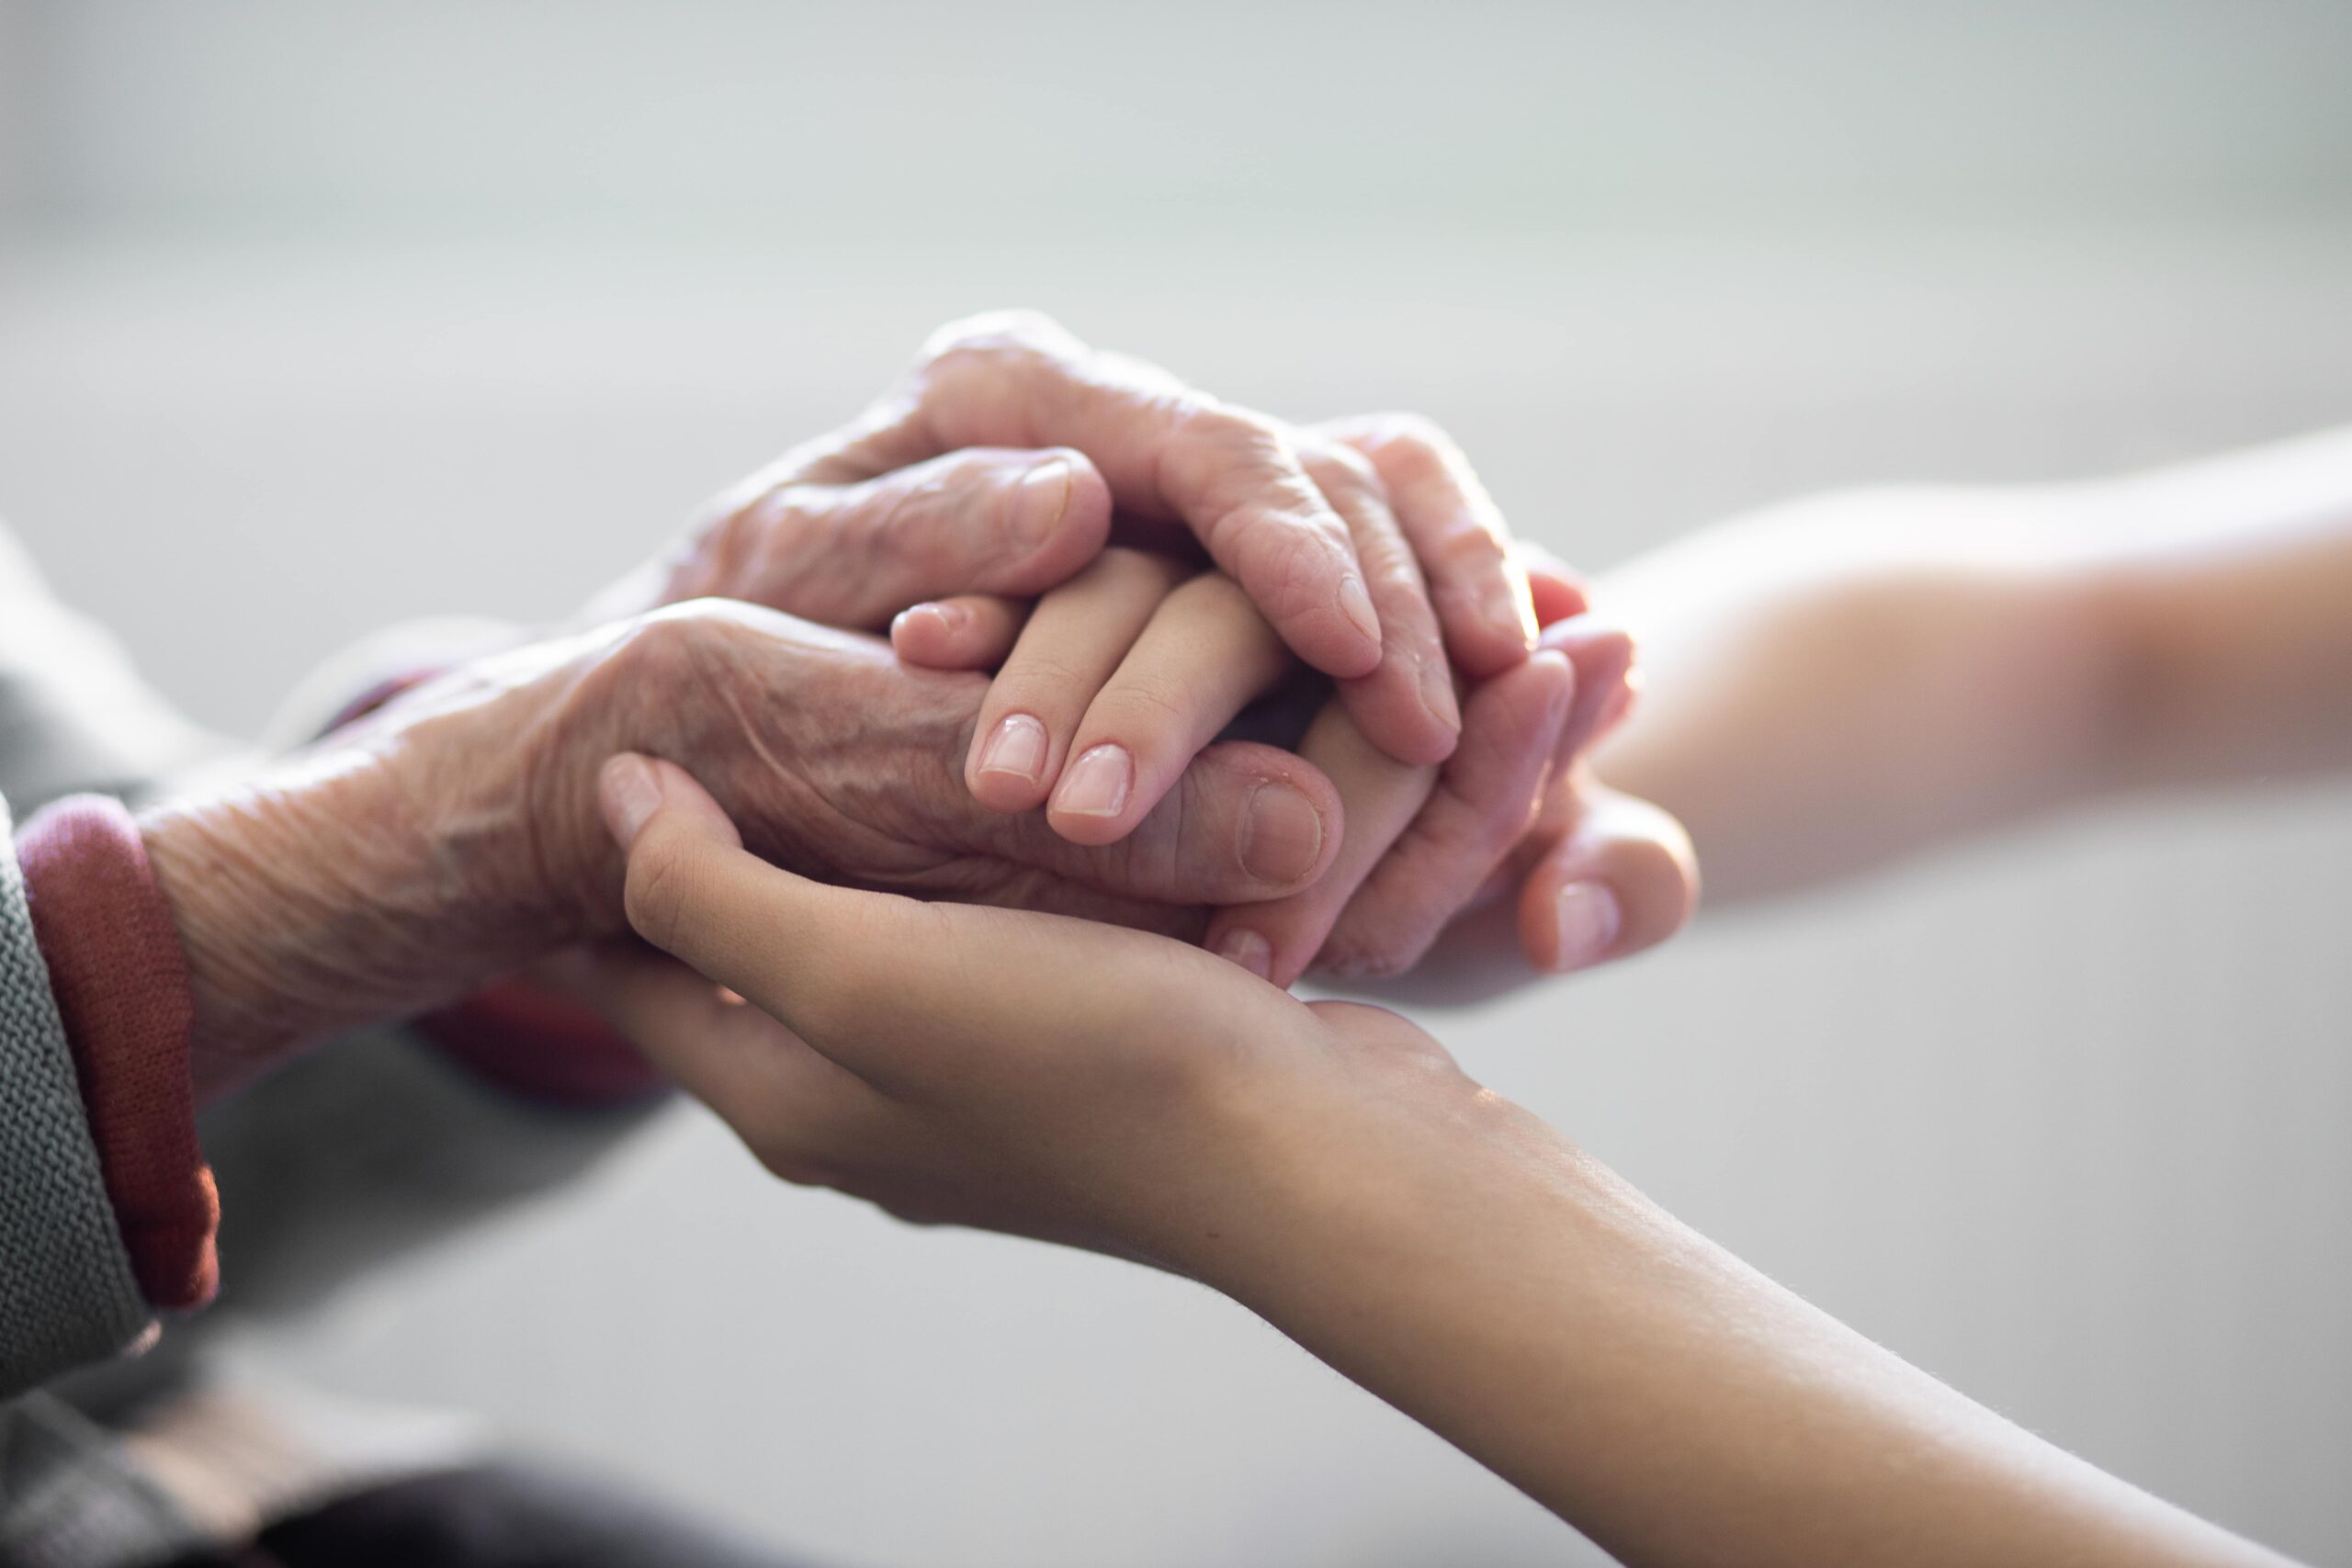 Elderly hands holding youth hands during end-of-life